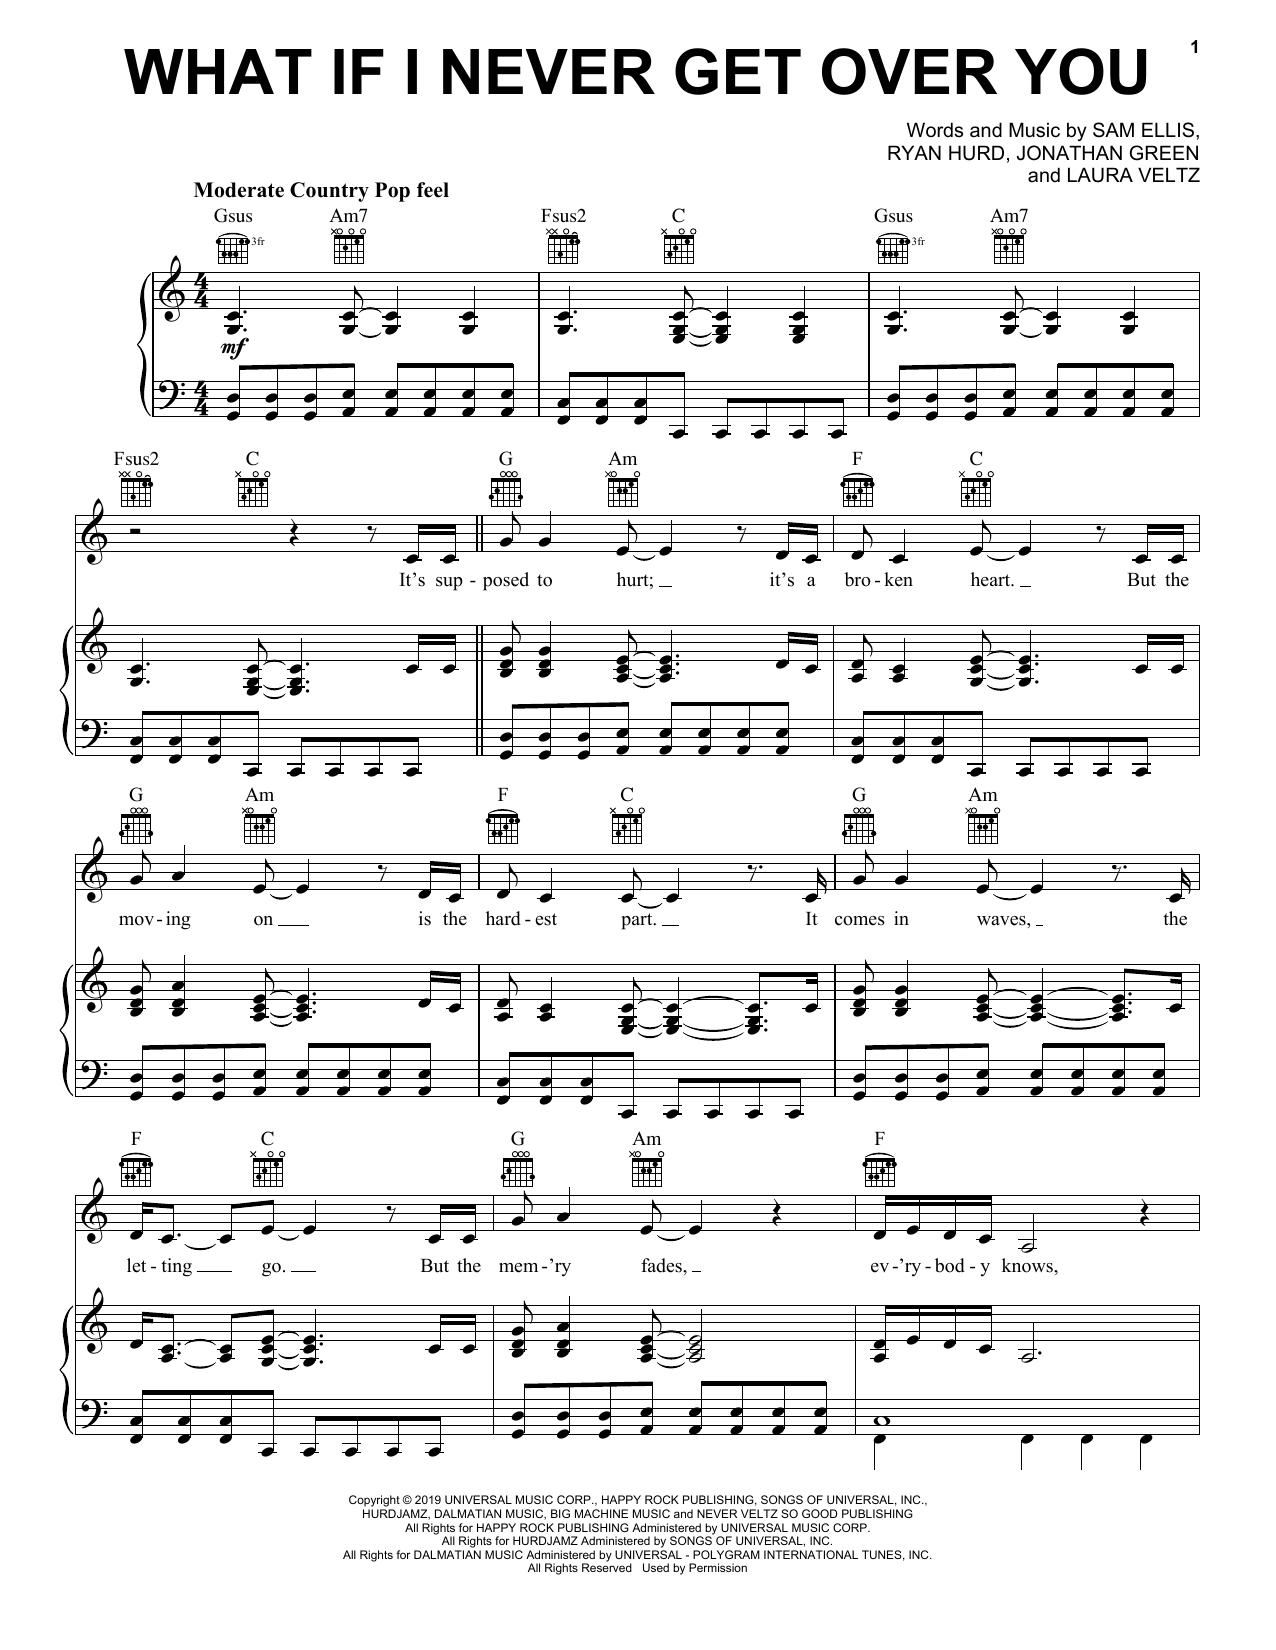 Download Lady Antebellum What If I Never Get Over You Sheet Music